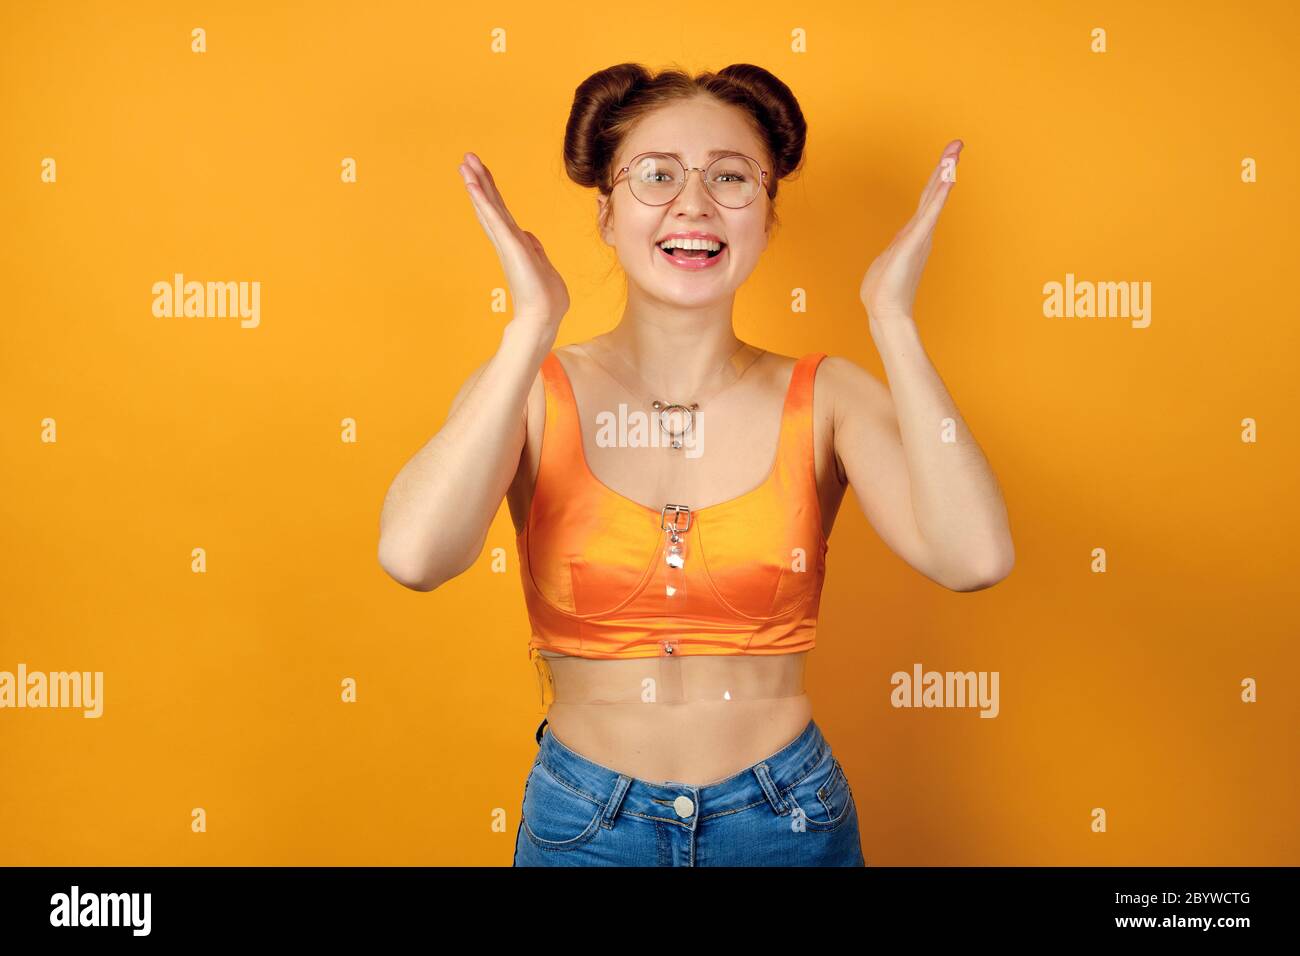 Redhead girl in round glasses and an orange top stands on a yellow background, laughs, raising palms up Stock Photo